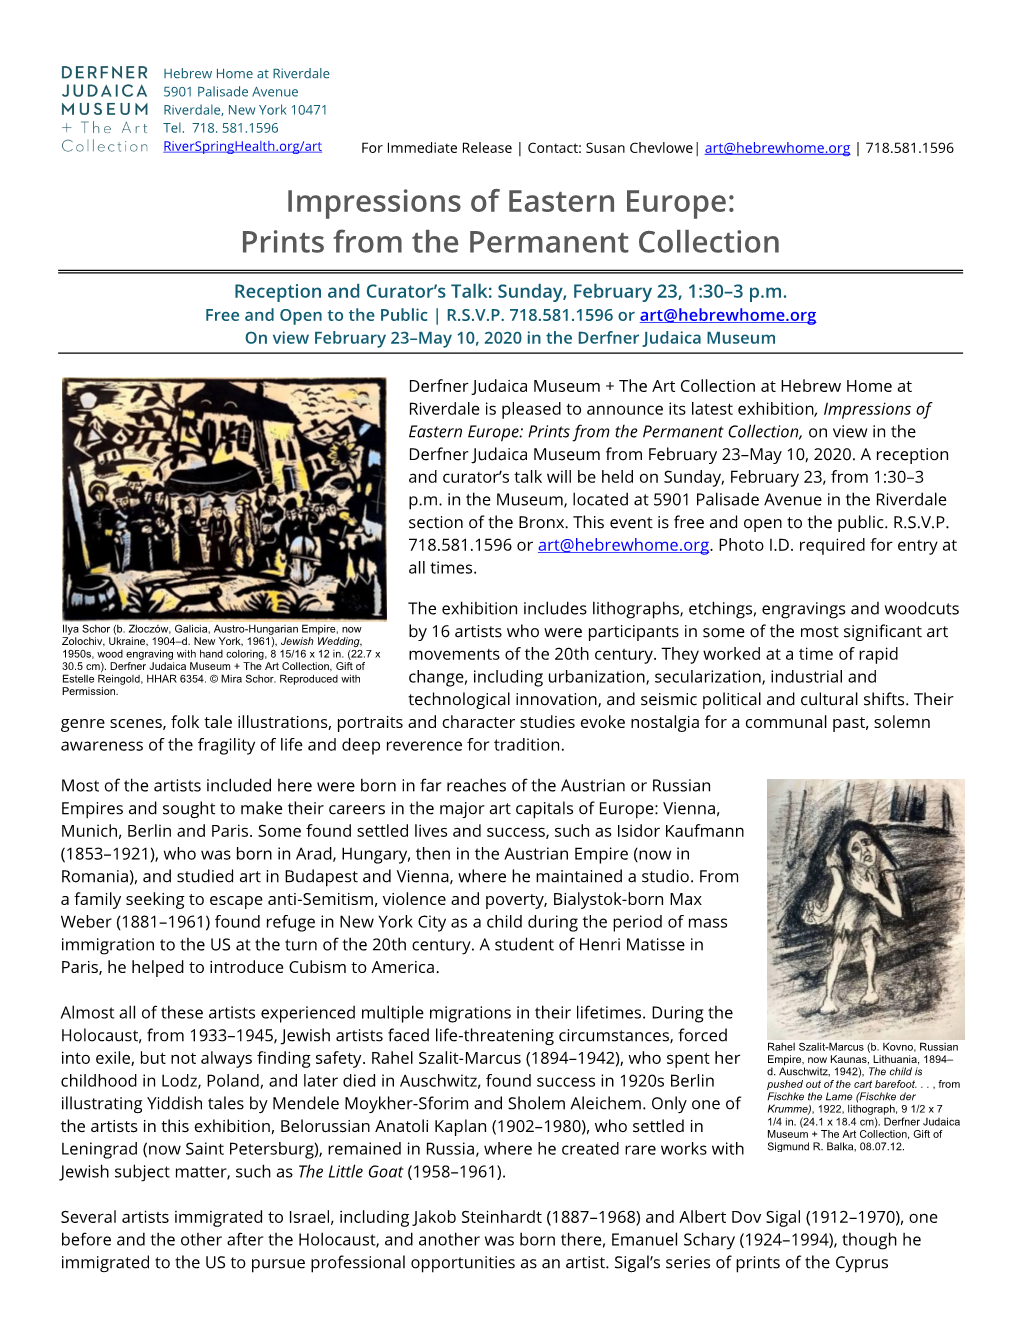 Impressions of Eastern Europe: Prints from the Permanent Collection